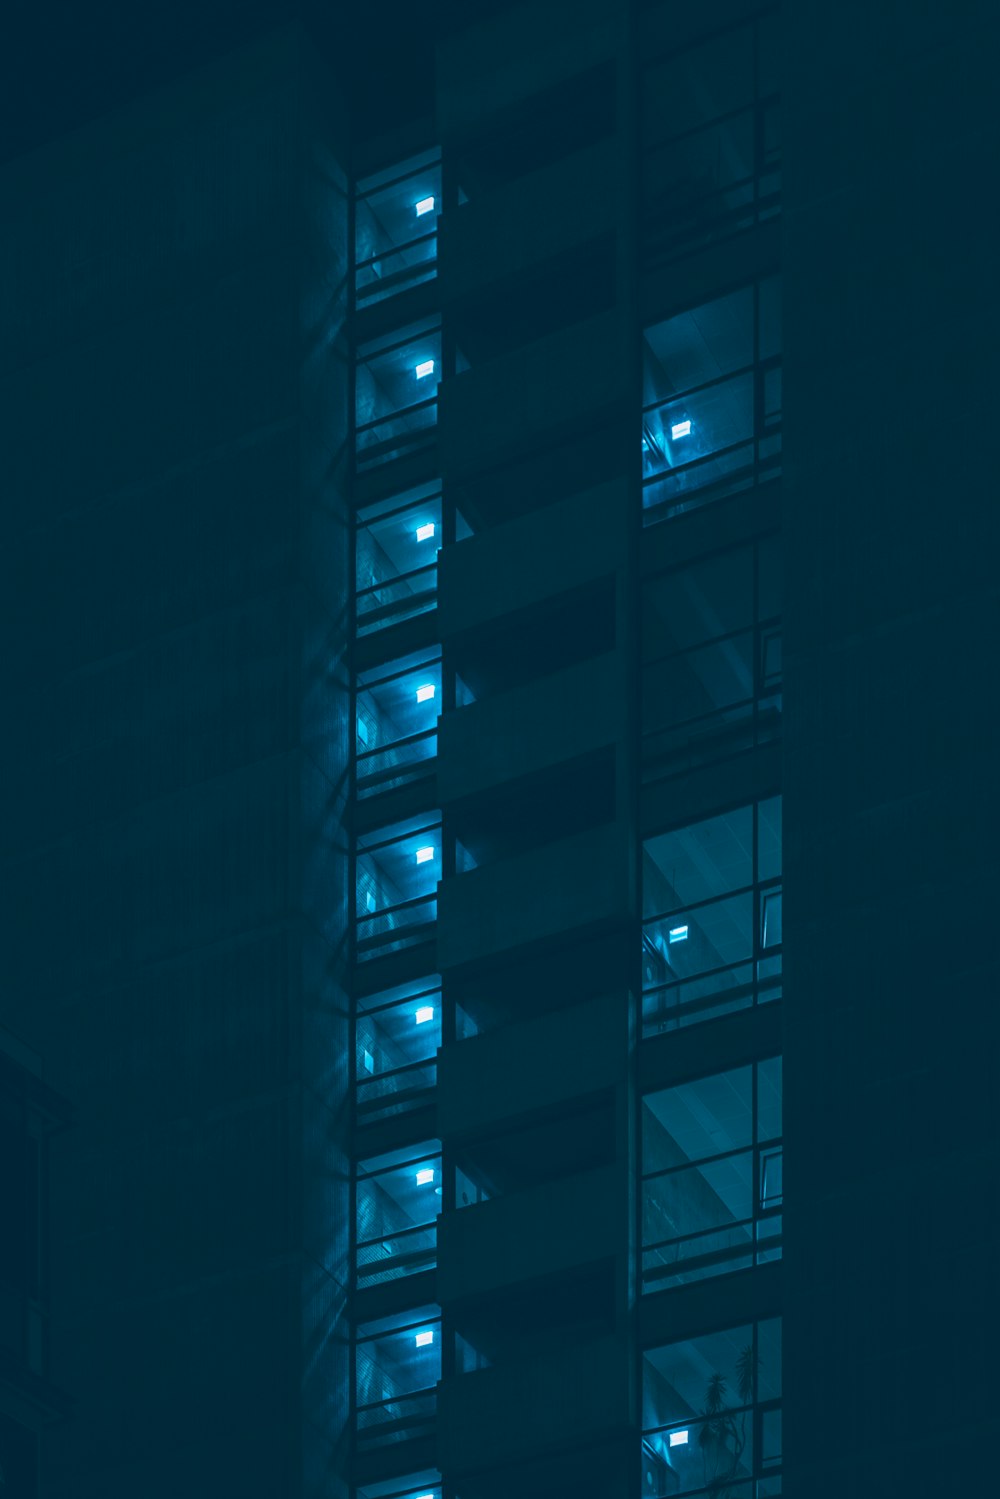 a tall building with many windows lit up at night